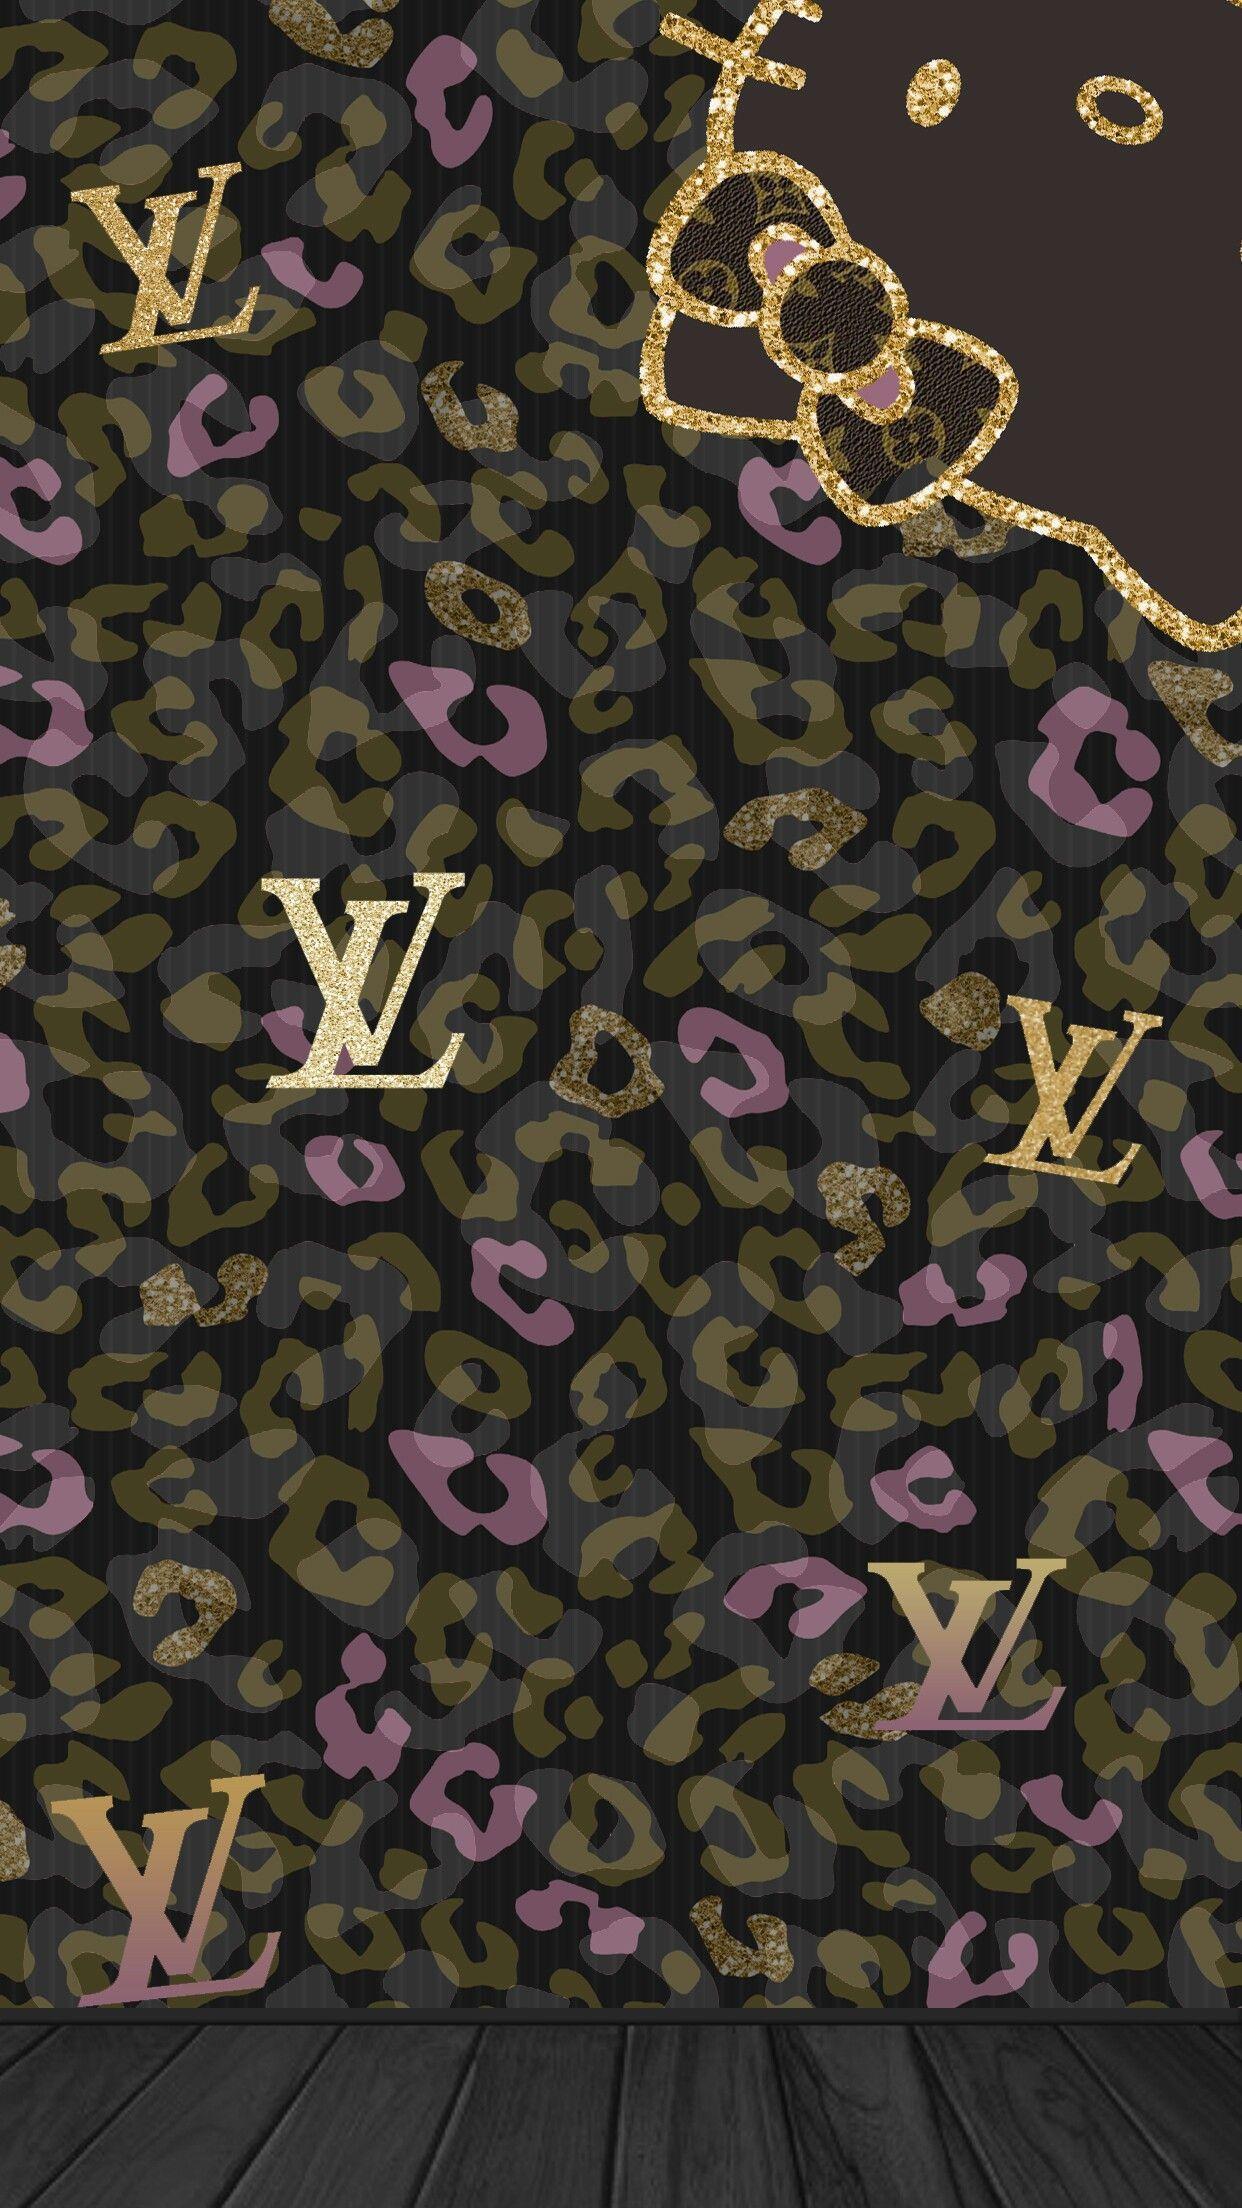 Backgrounds Lv - Wallpaper Cave